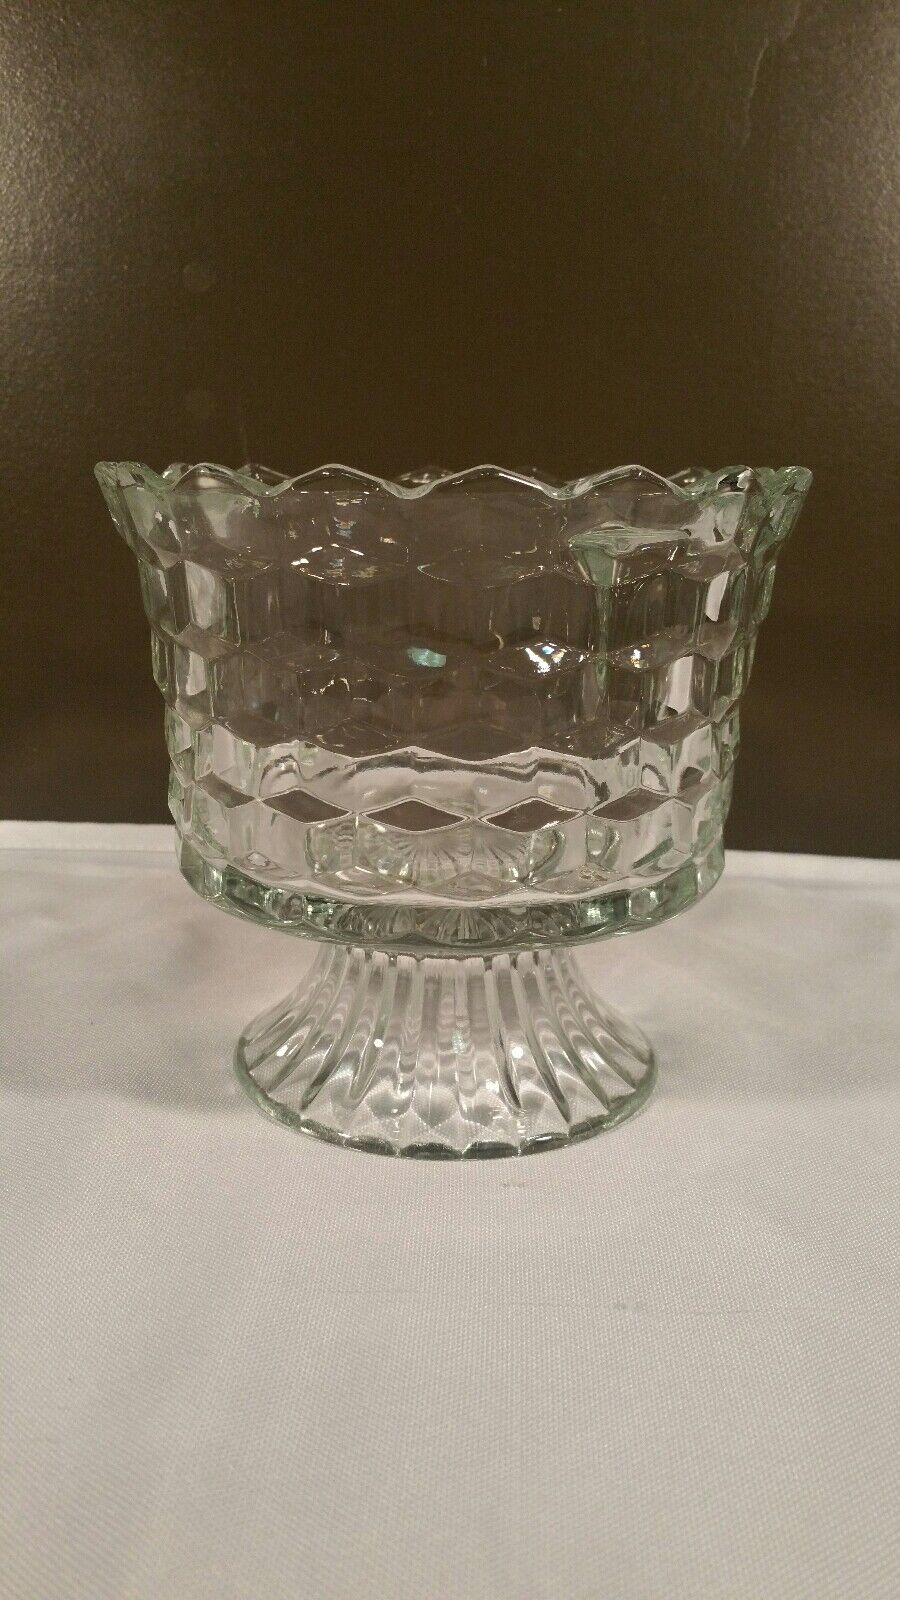 HOMECO PEDESTAL DIAMOND POINT CANDY DISH (EXCELLENT CONDITION)